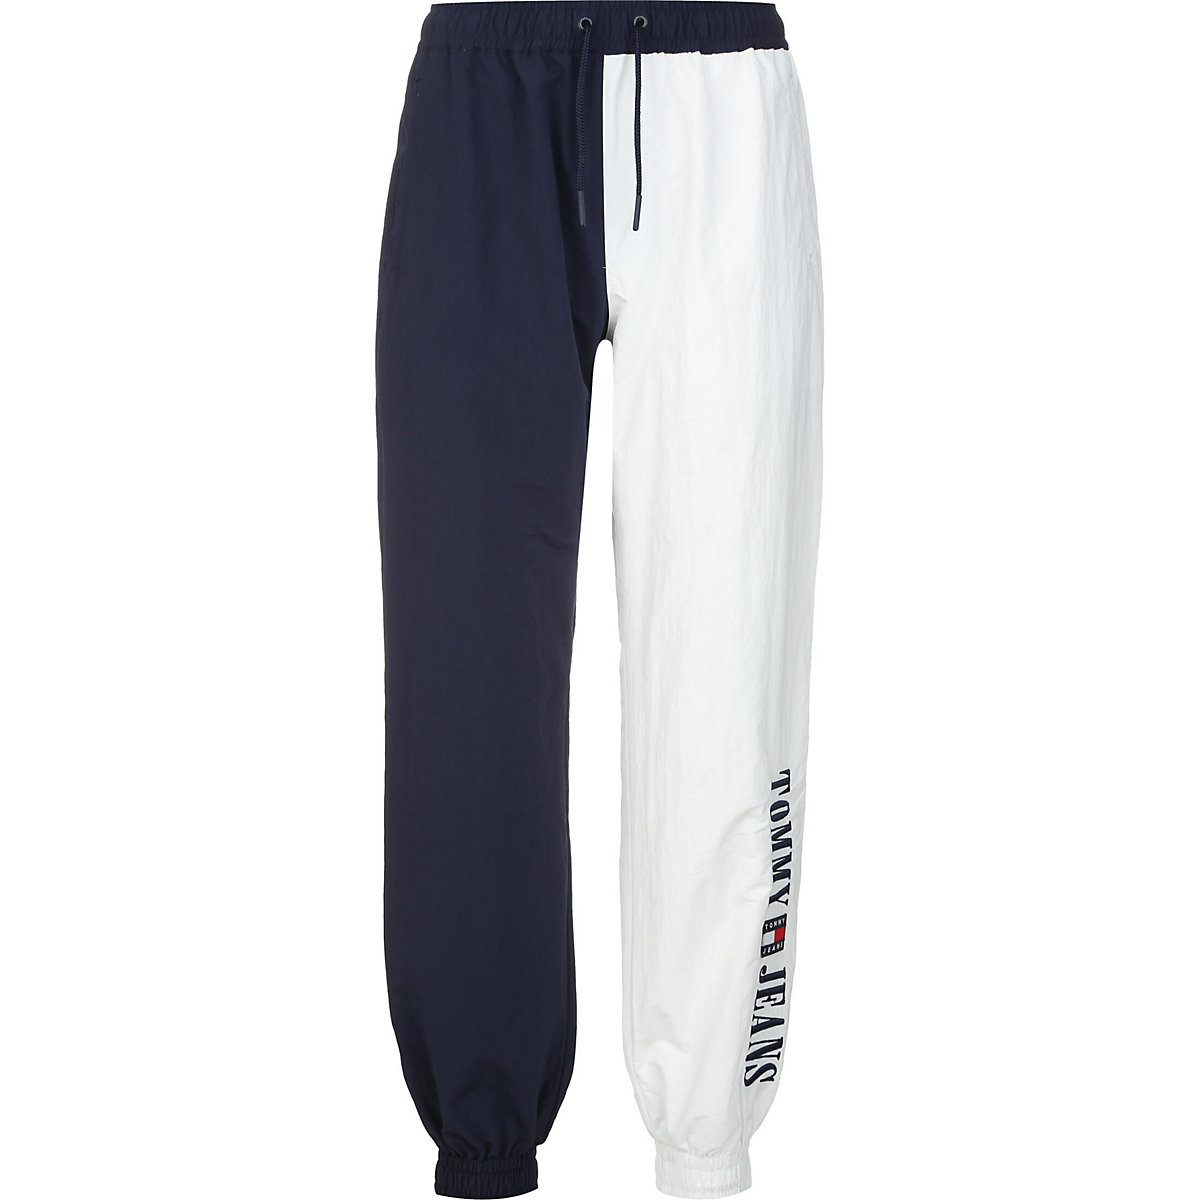 TOMMY JEANS Tommy Jeans Trainingshose Archive Relaxed Fit Color Block Trainingshosen blau/weiß